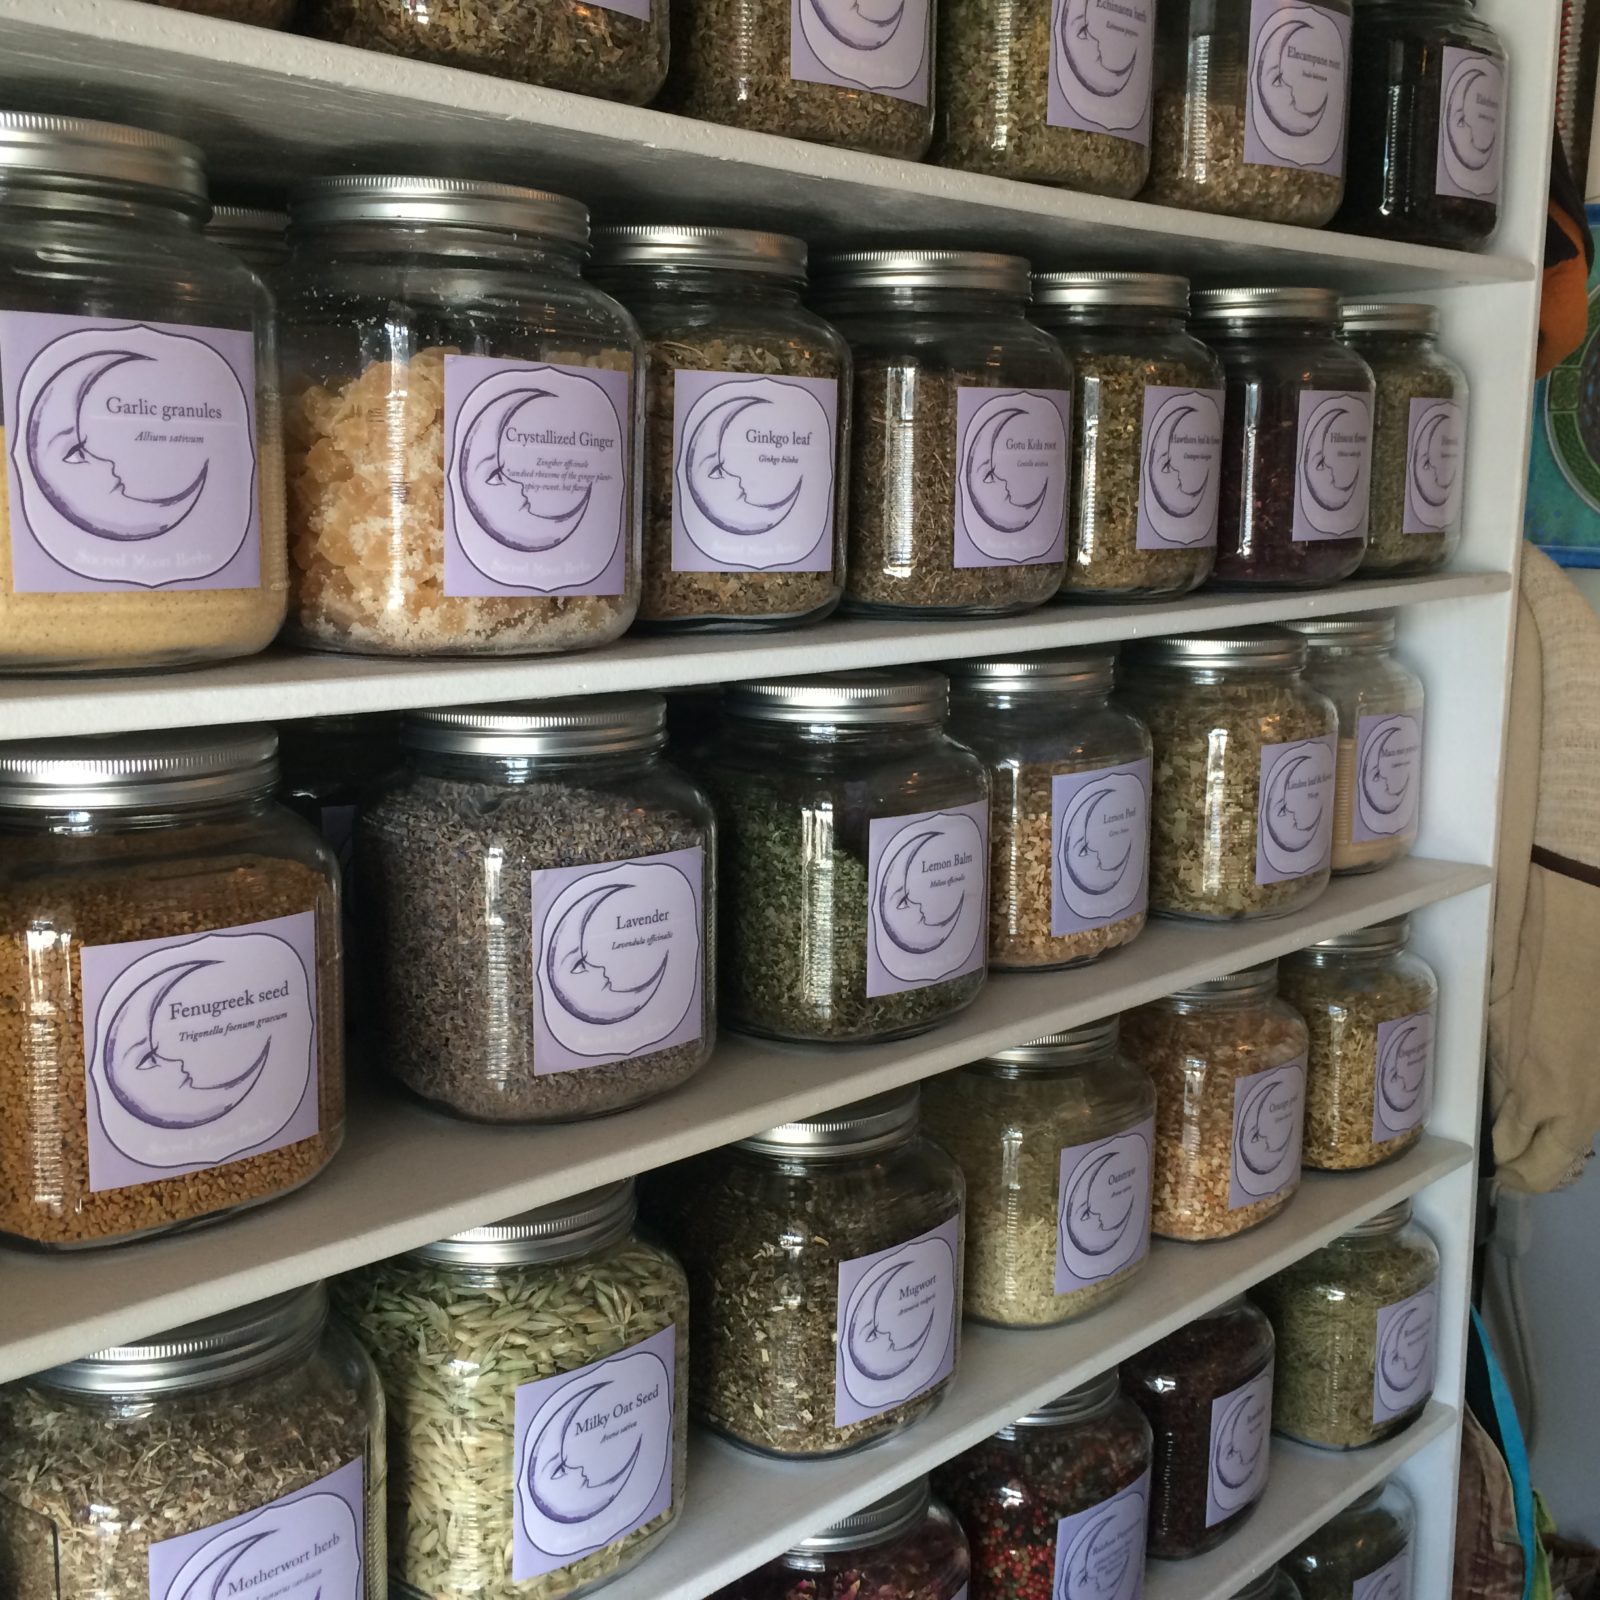 Sacred Moon Herbs in Dripping Springs Texas